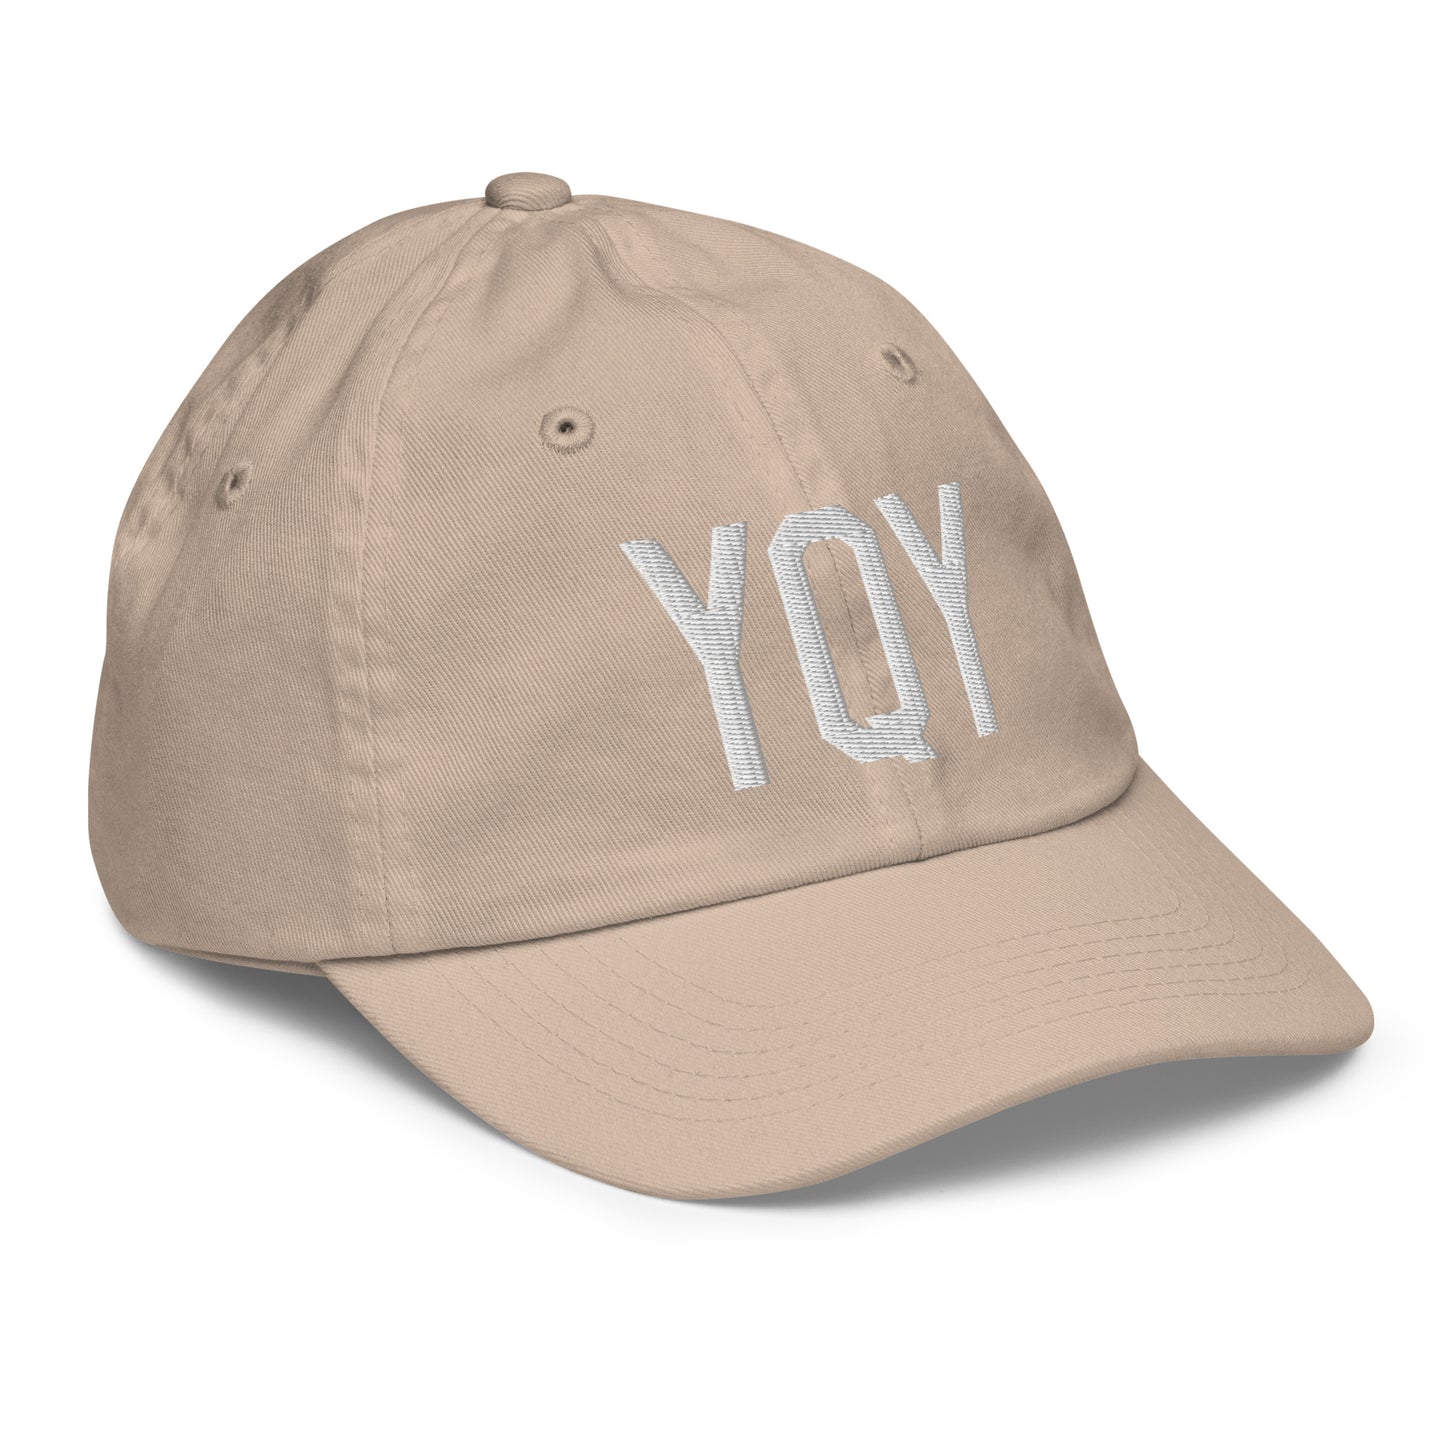 Airport Code Kid's Baseball Cap - White • YQY Sydney • YHM Designs - Image 29